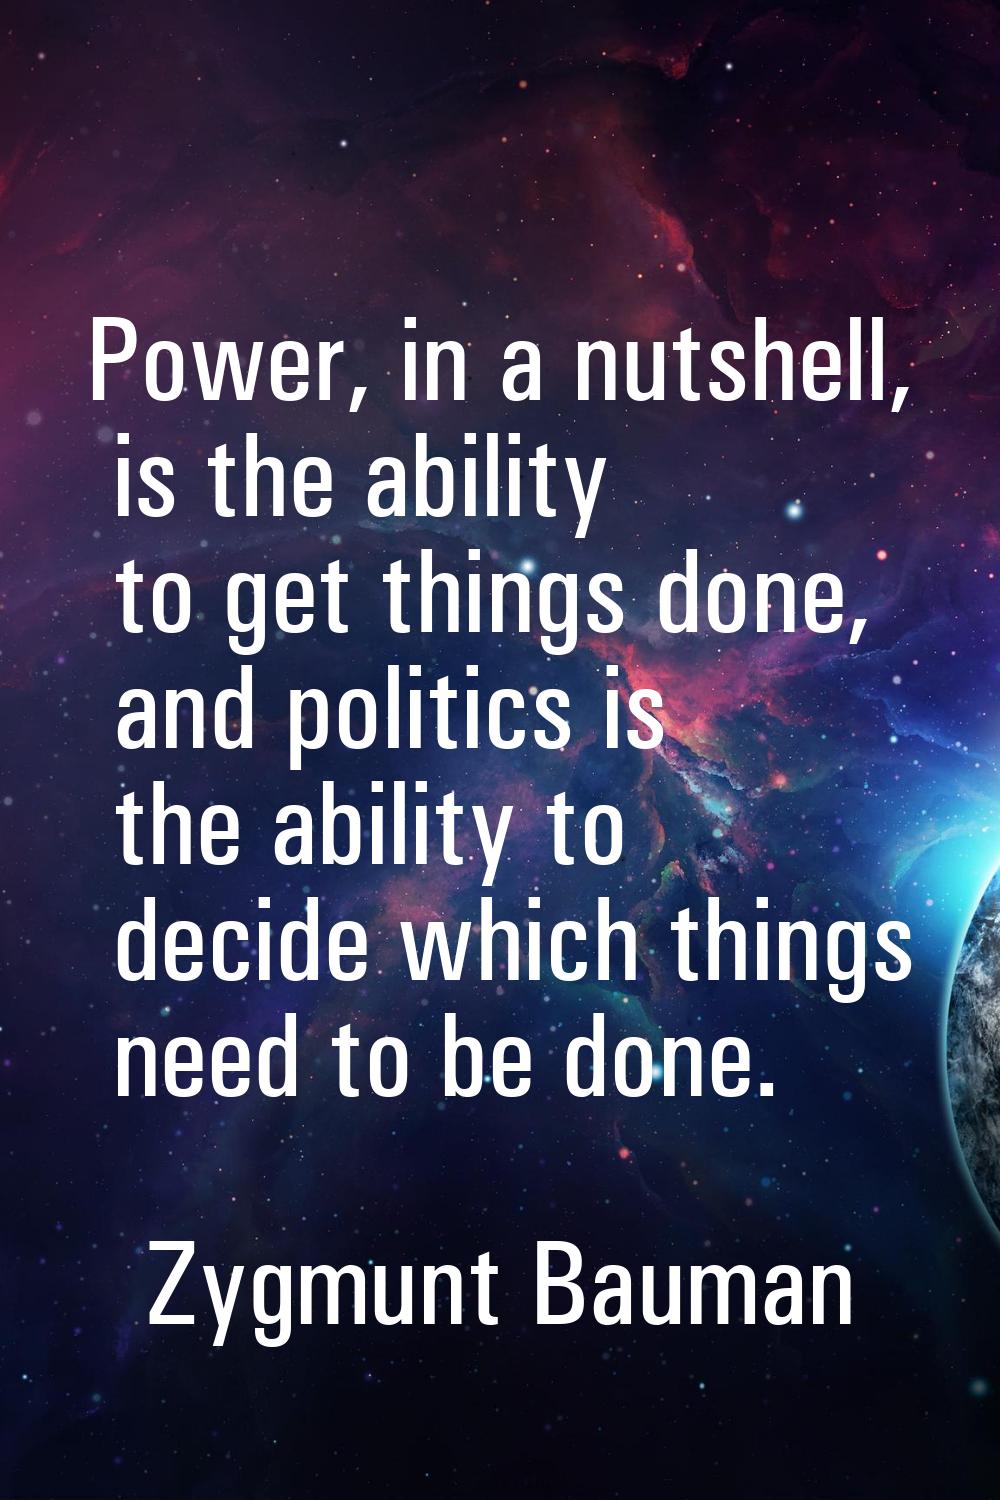 Power, in a nutshell, is the ability to get things done, and politics is the ability to decide whic